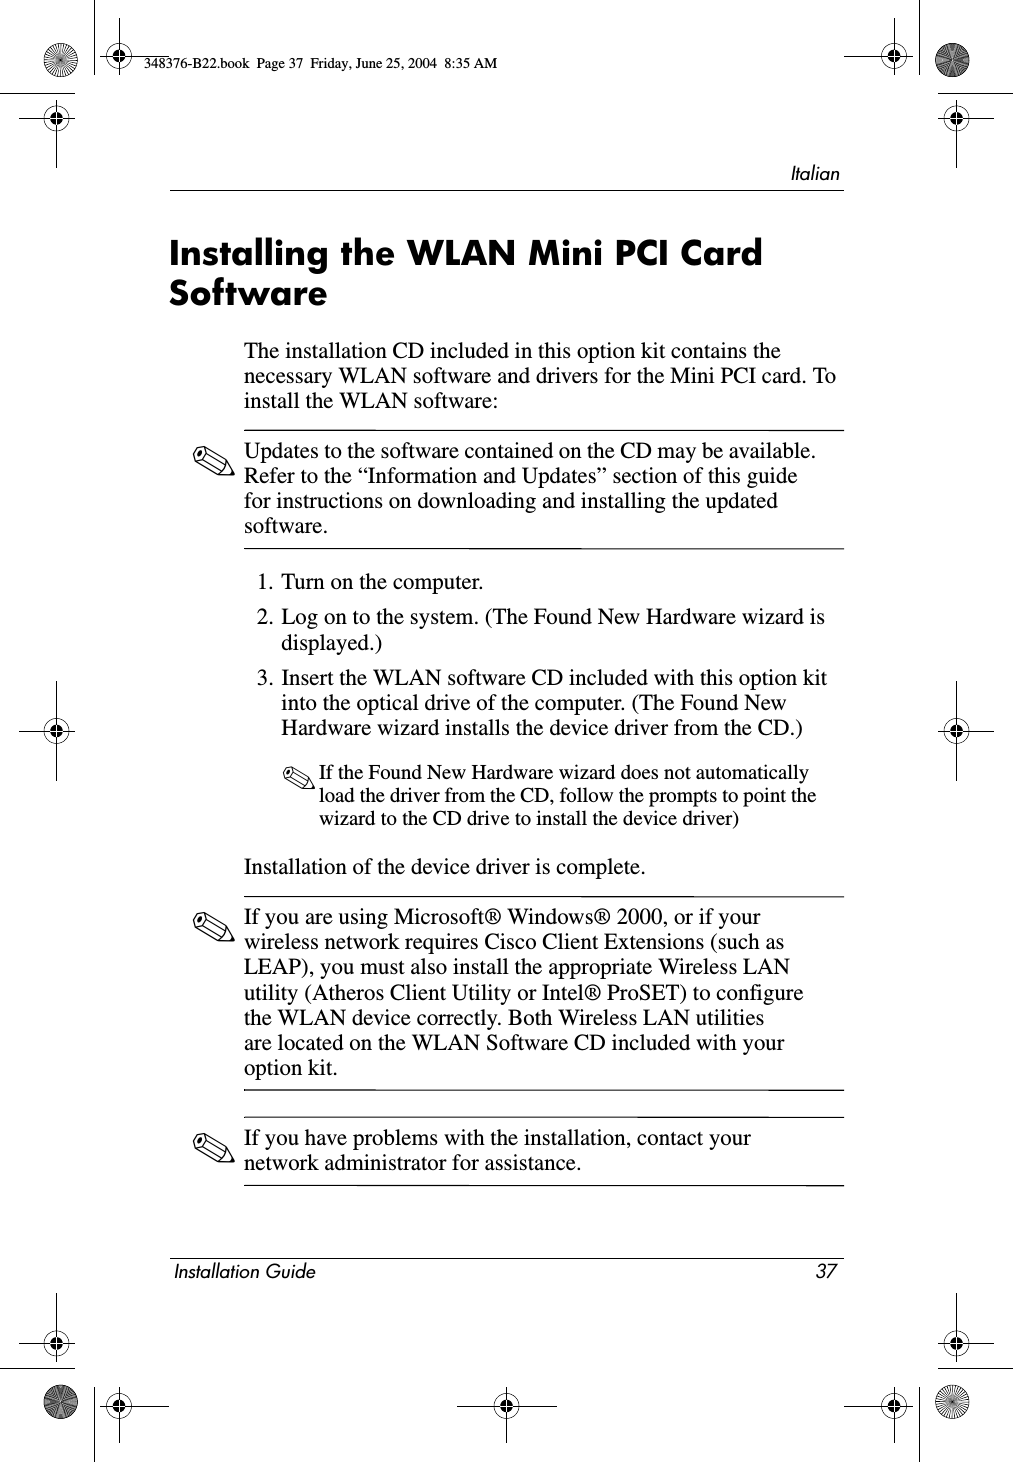 ItalianInstallation Guide 37Installing the WLAN Mini PCI Card SoftwareThe installation CD included in this option kit contains the necessary WLAN software and drivers for the Mini PCI card. To install the WLAN software: ✎Updates to the software contained on the CD may be available. Refer to the “Information and Updates” section of this guide for instructions on downloading and installing the updated software.1. Turn on the computer.2. Log on to the system. (The Found New Hardware wizard is displayed.)3. Insert the WLAN software CD included with this option kit into the optical drive of the computer. (The Found New Hardware wizard installs the device driver from the CD.)✎If the Found New Hardware wizard does not automatically load the driver from the CD, follow the prompts to point the wizard to the CD drive to install the device driver)Installation of the device driver is complete.✎If you are using Microsoft® Windows® 2000, or if your wireless network requires Cisco Client Extensions (such as LEAP), you must also install the appropriate Wireless LAN utility (Atheros Client Utility or Intel® ProSET) to configure the WLAN device correctly. Both Wireless LAN utilities are located on the WLAN Software CD included with your option kit. ✎If you have problems with the installation, contact your network administrator for assistance.348376-B22.book  Page 37  Friday, June 25, 2004  8:35 AM